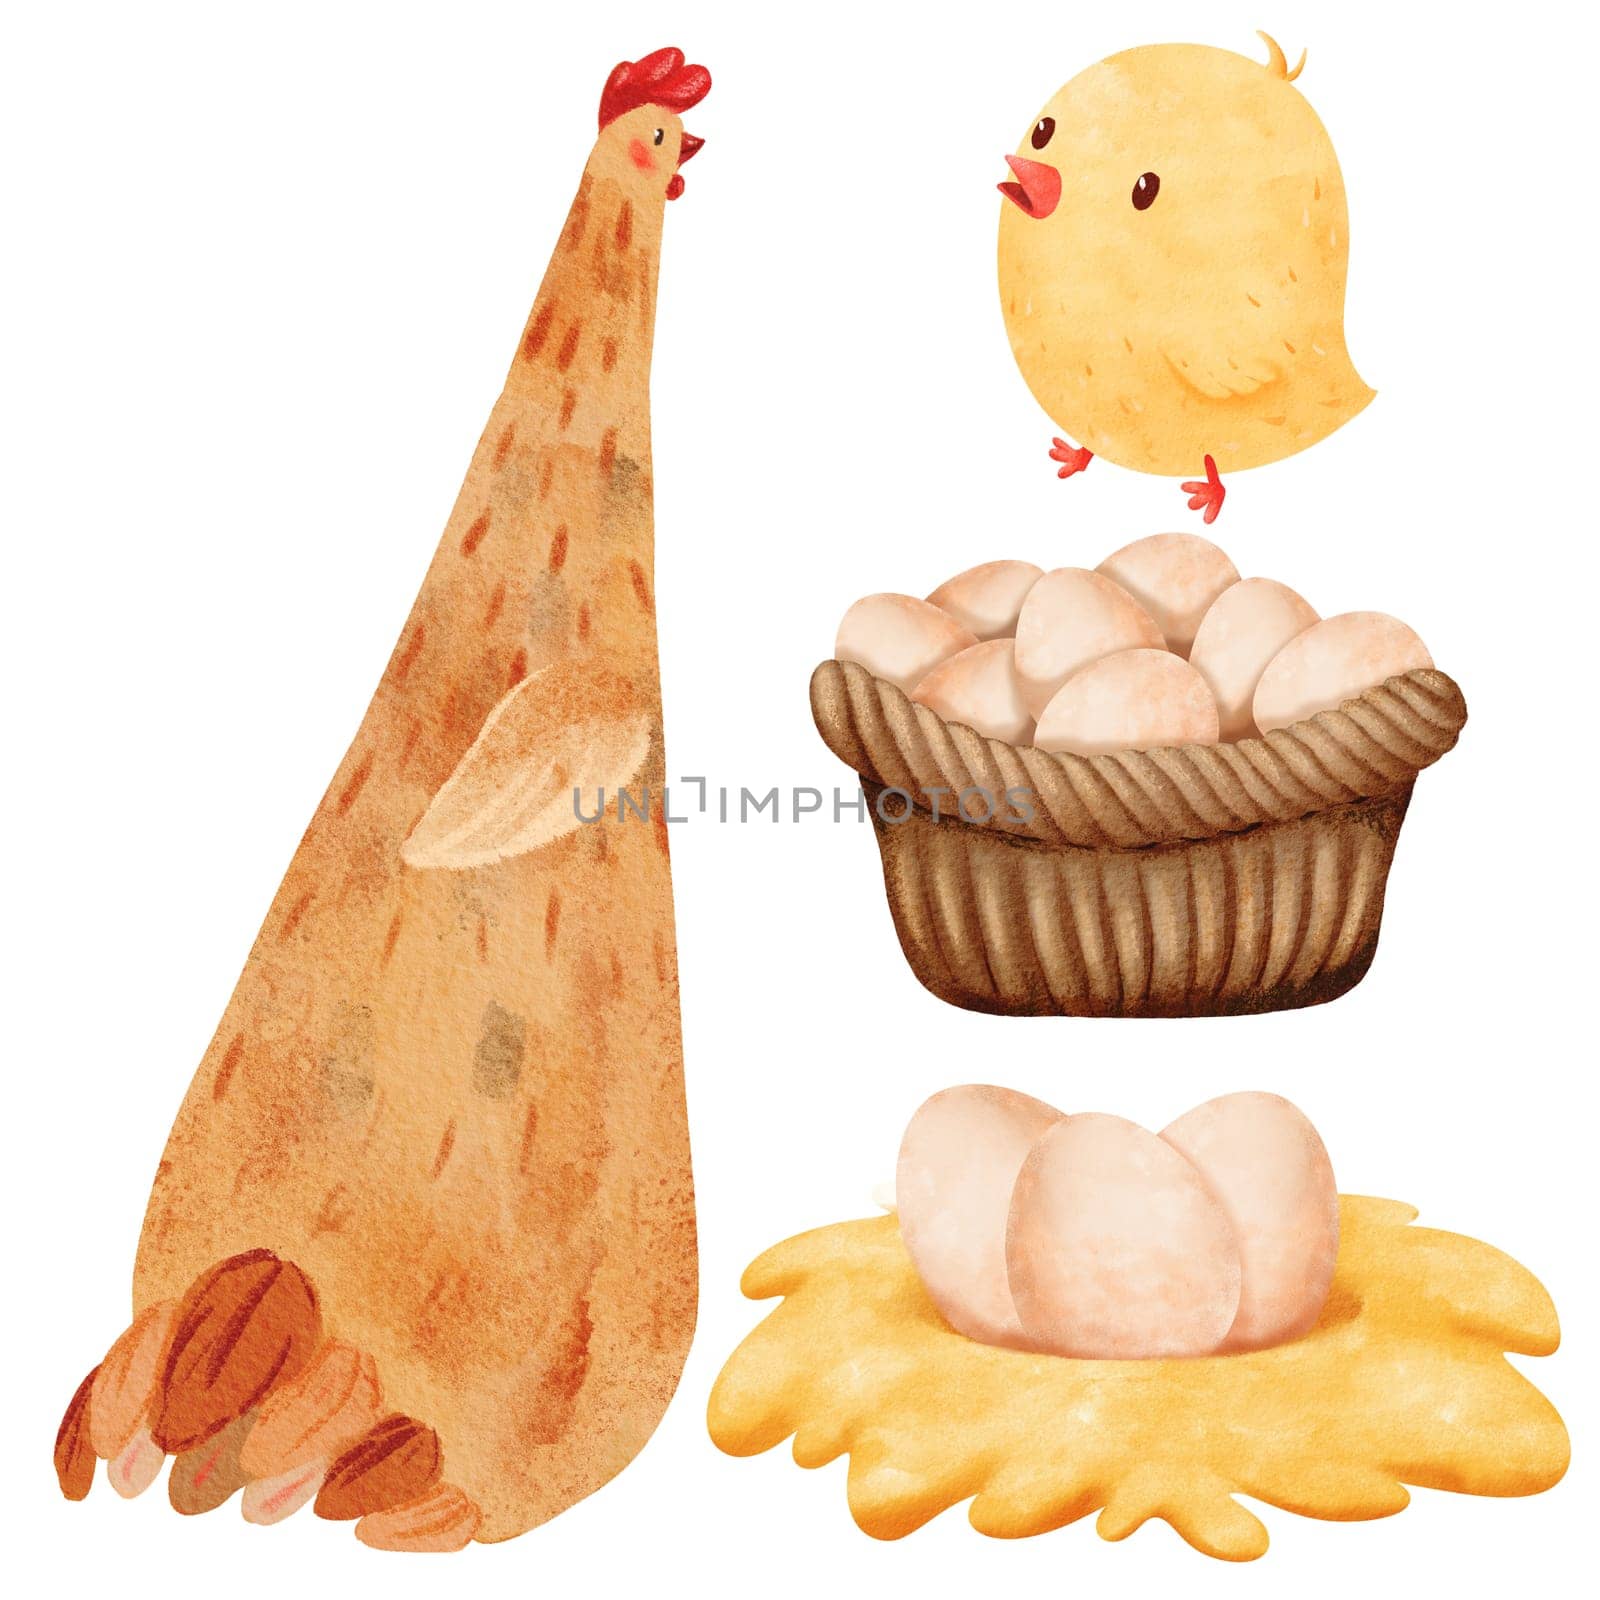 watercolor set featuring adorable chicks, hens, eggs in a basket, and eggs in a nest. farm theme, for various occasions, including birthdays and Easter. The illustrations in a playful cartoon style.